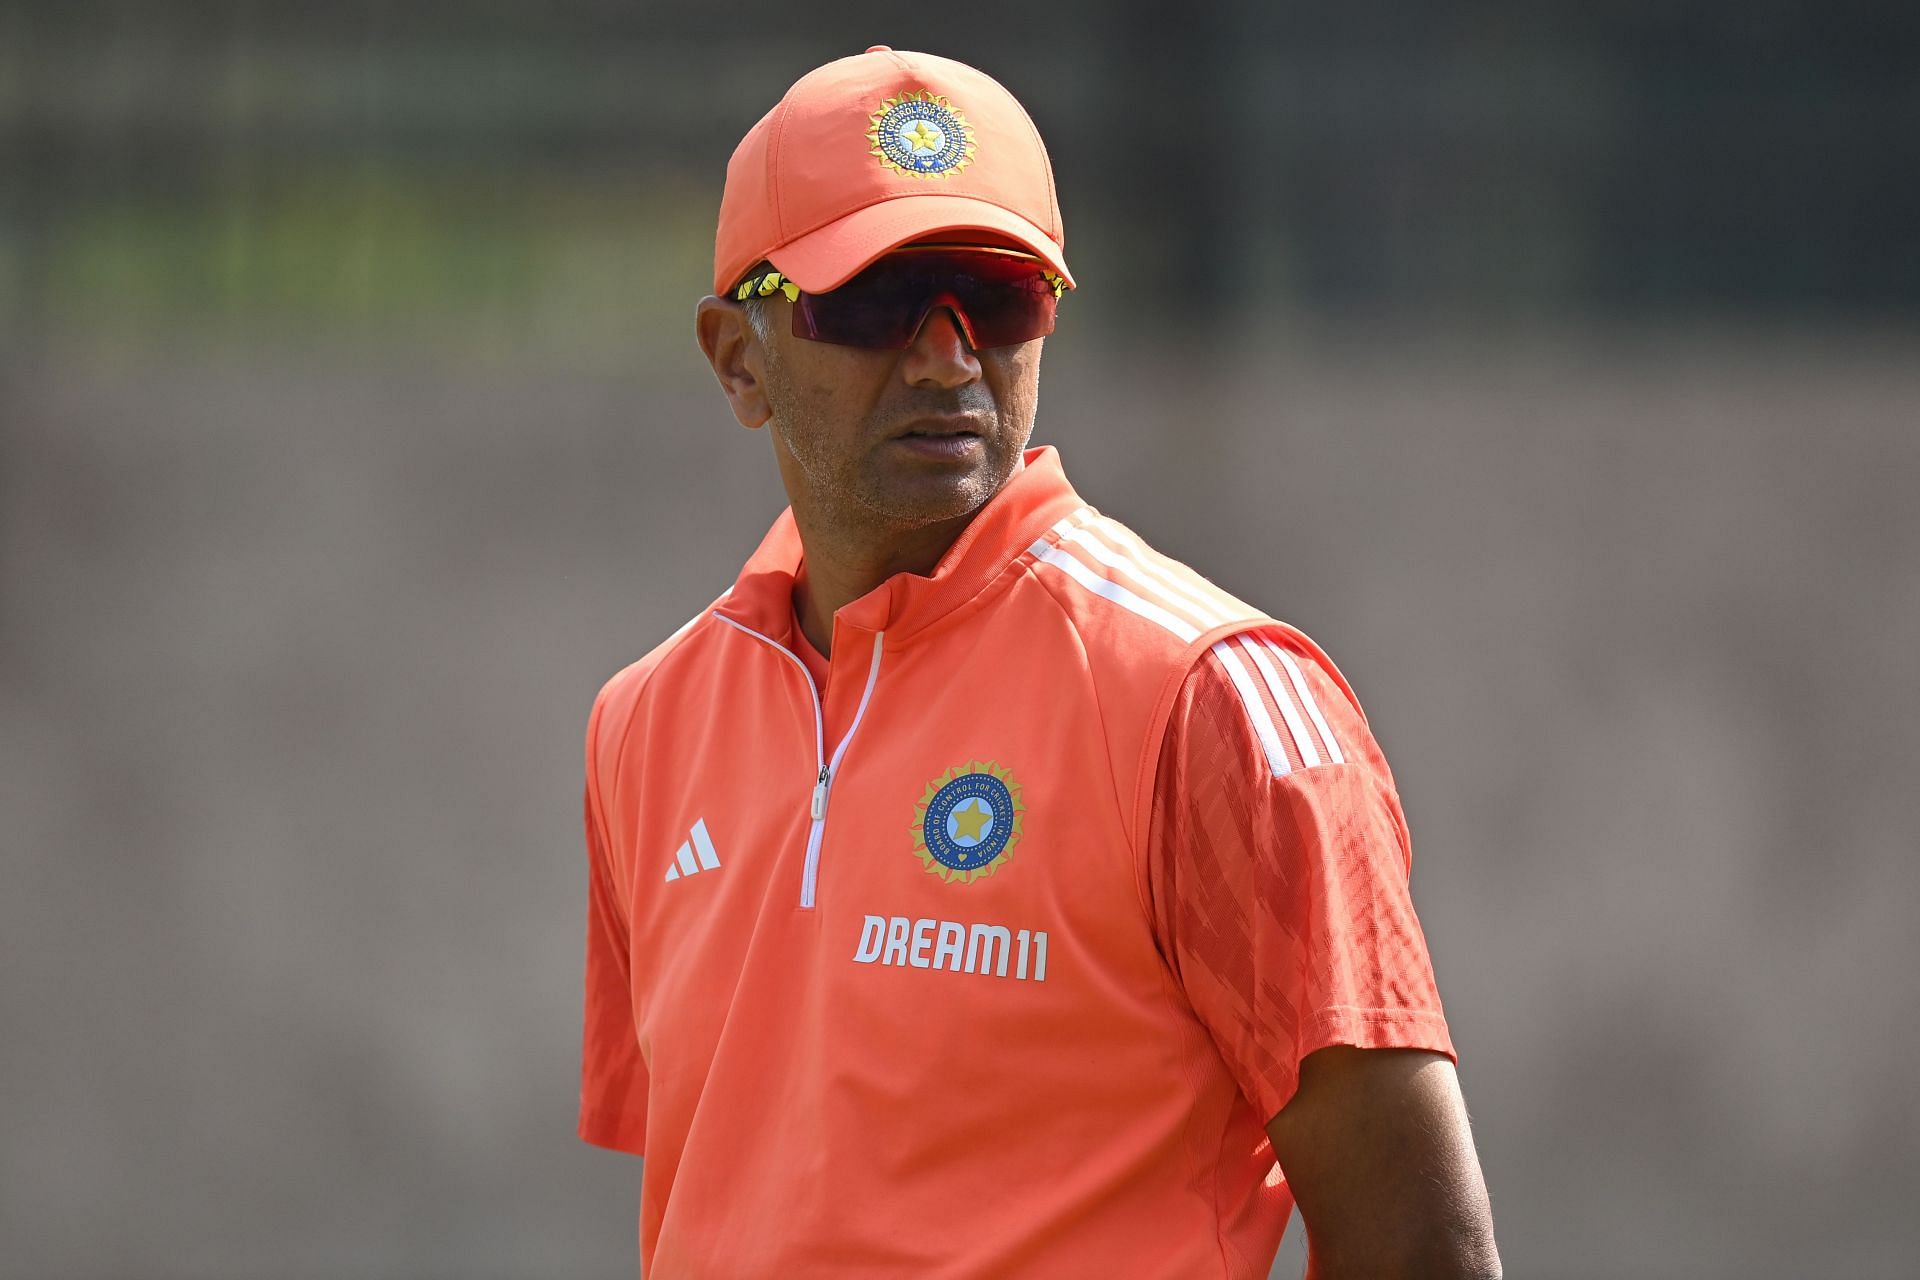 India head coach Rahul Dravid must have a say in pitch preparation, despite him saying otherwise